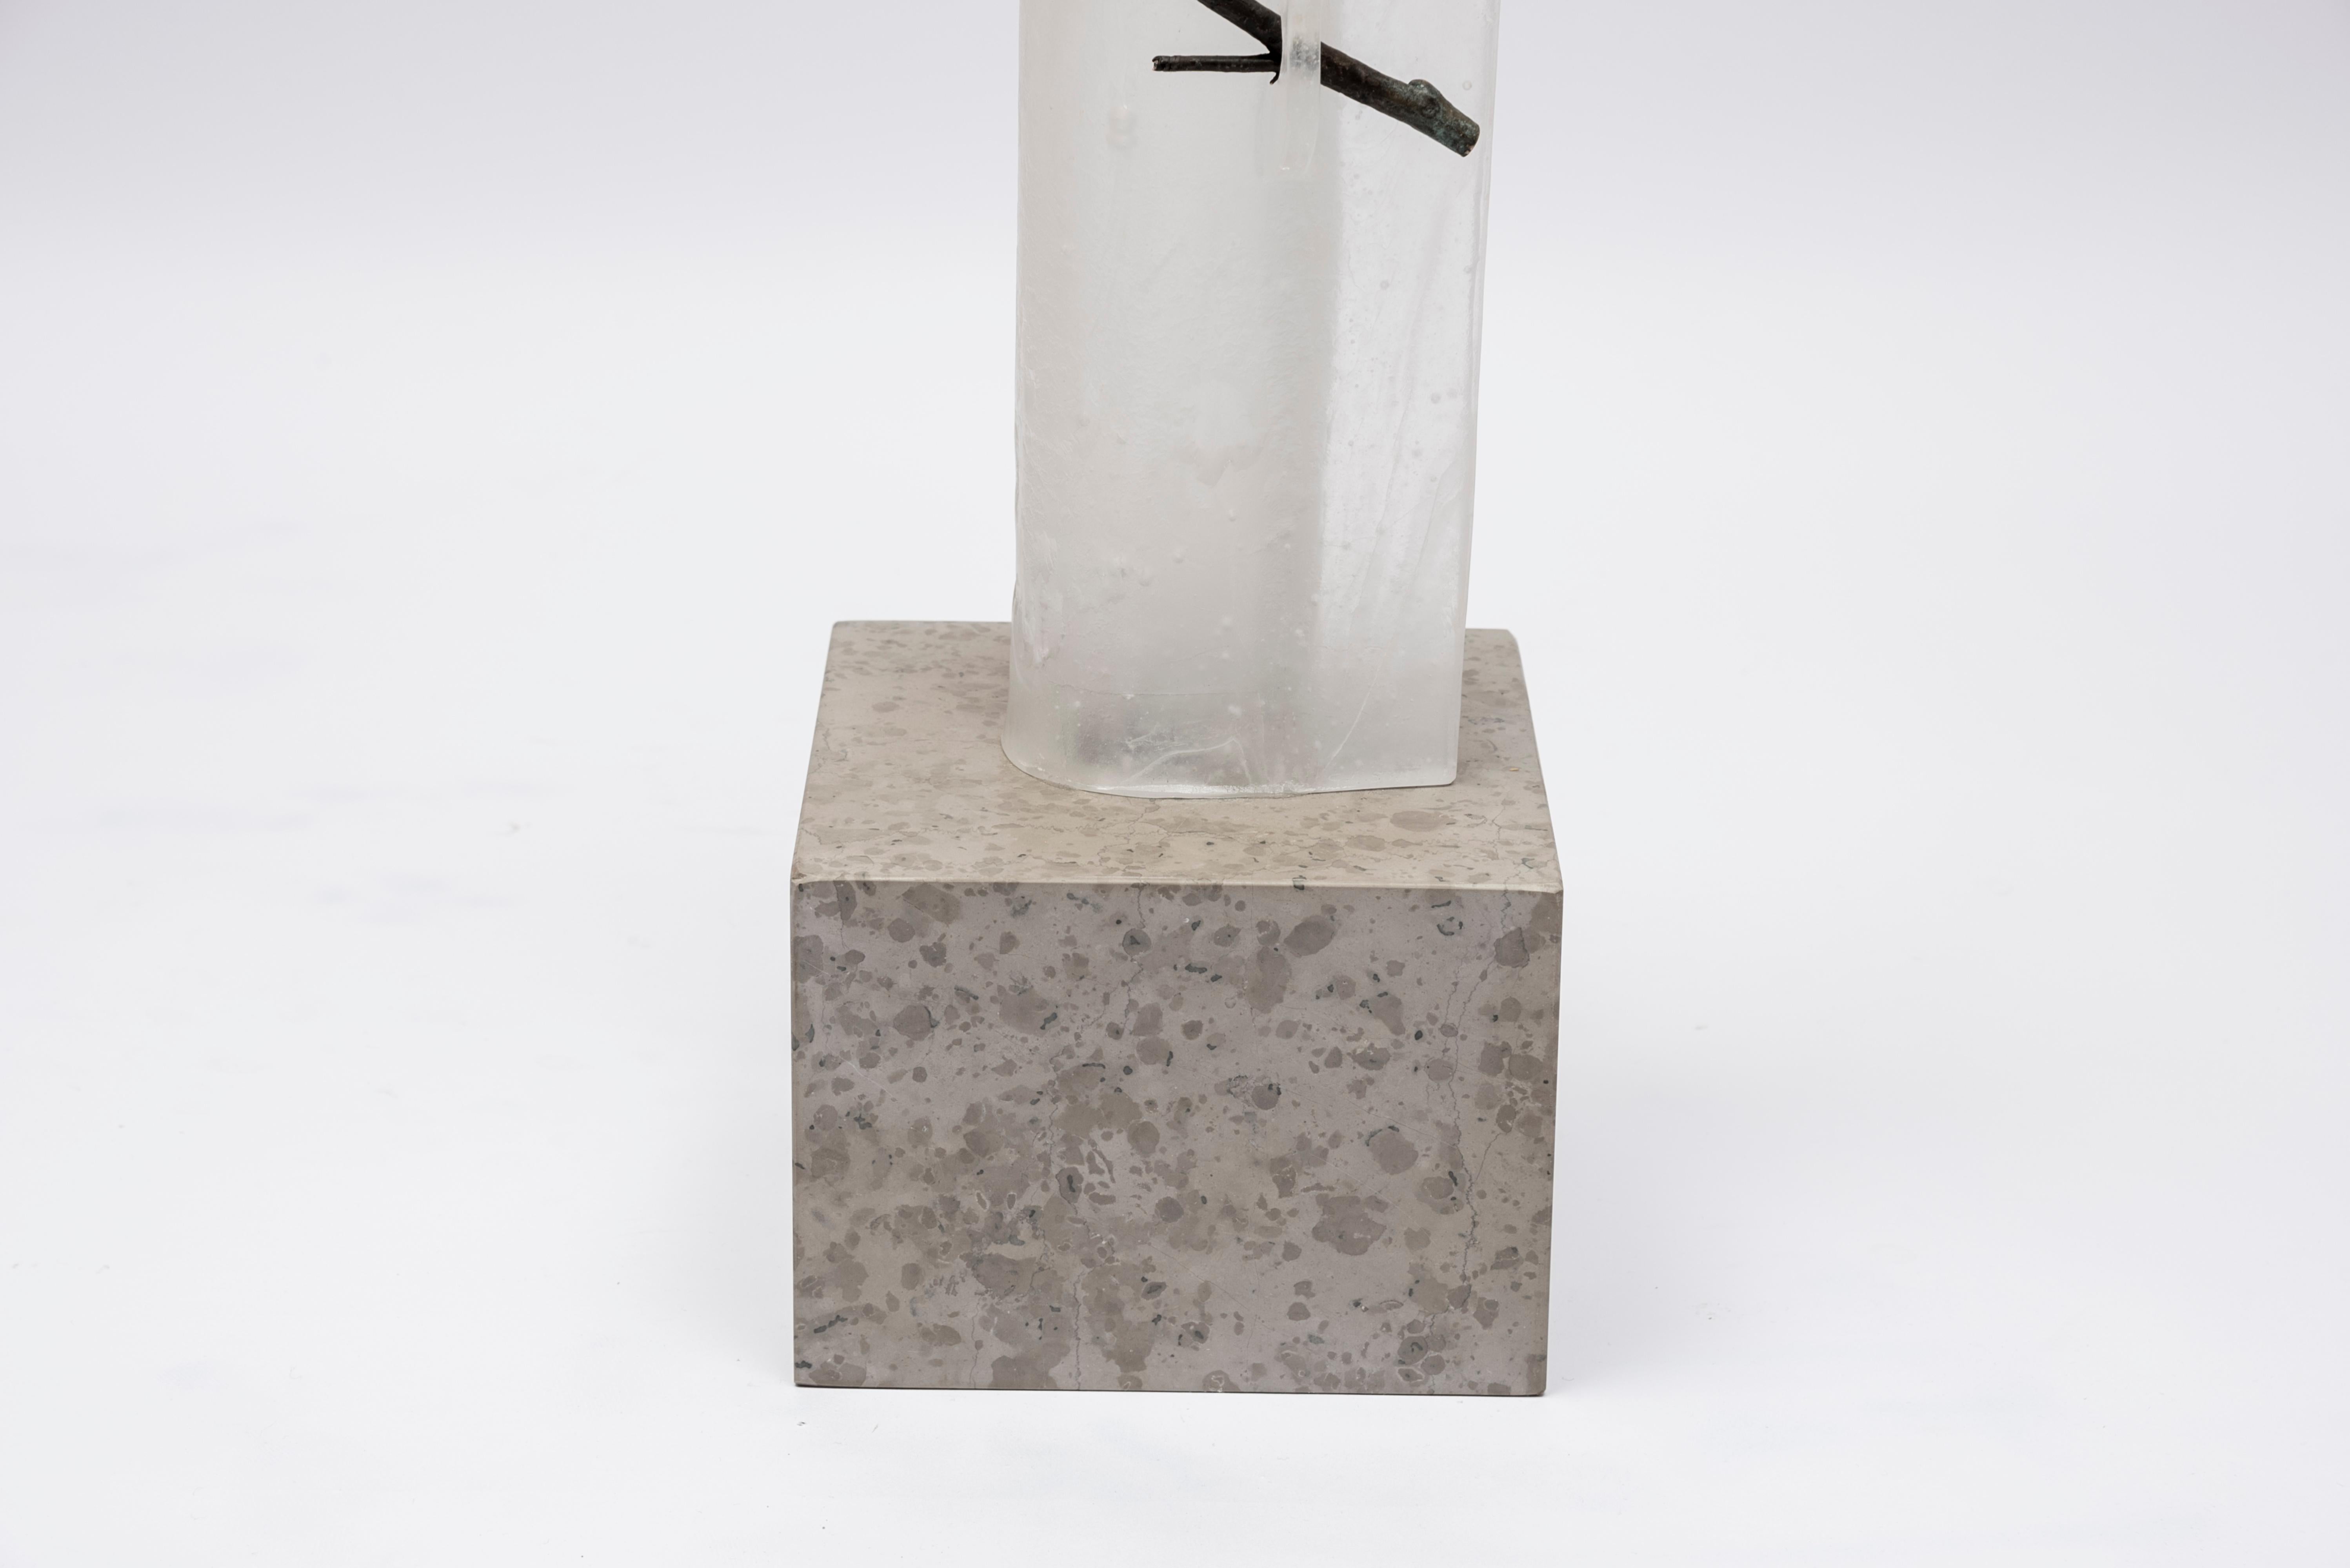 Vase sculpture in frosted glass and marble base by Georges Stahl
With a bronze tree branch.